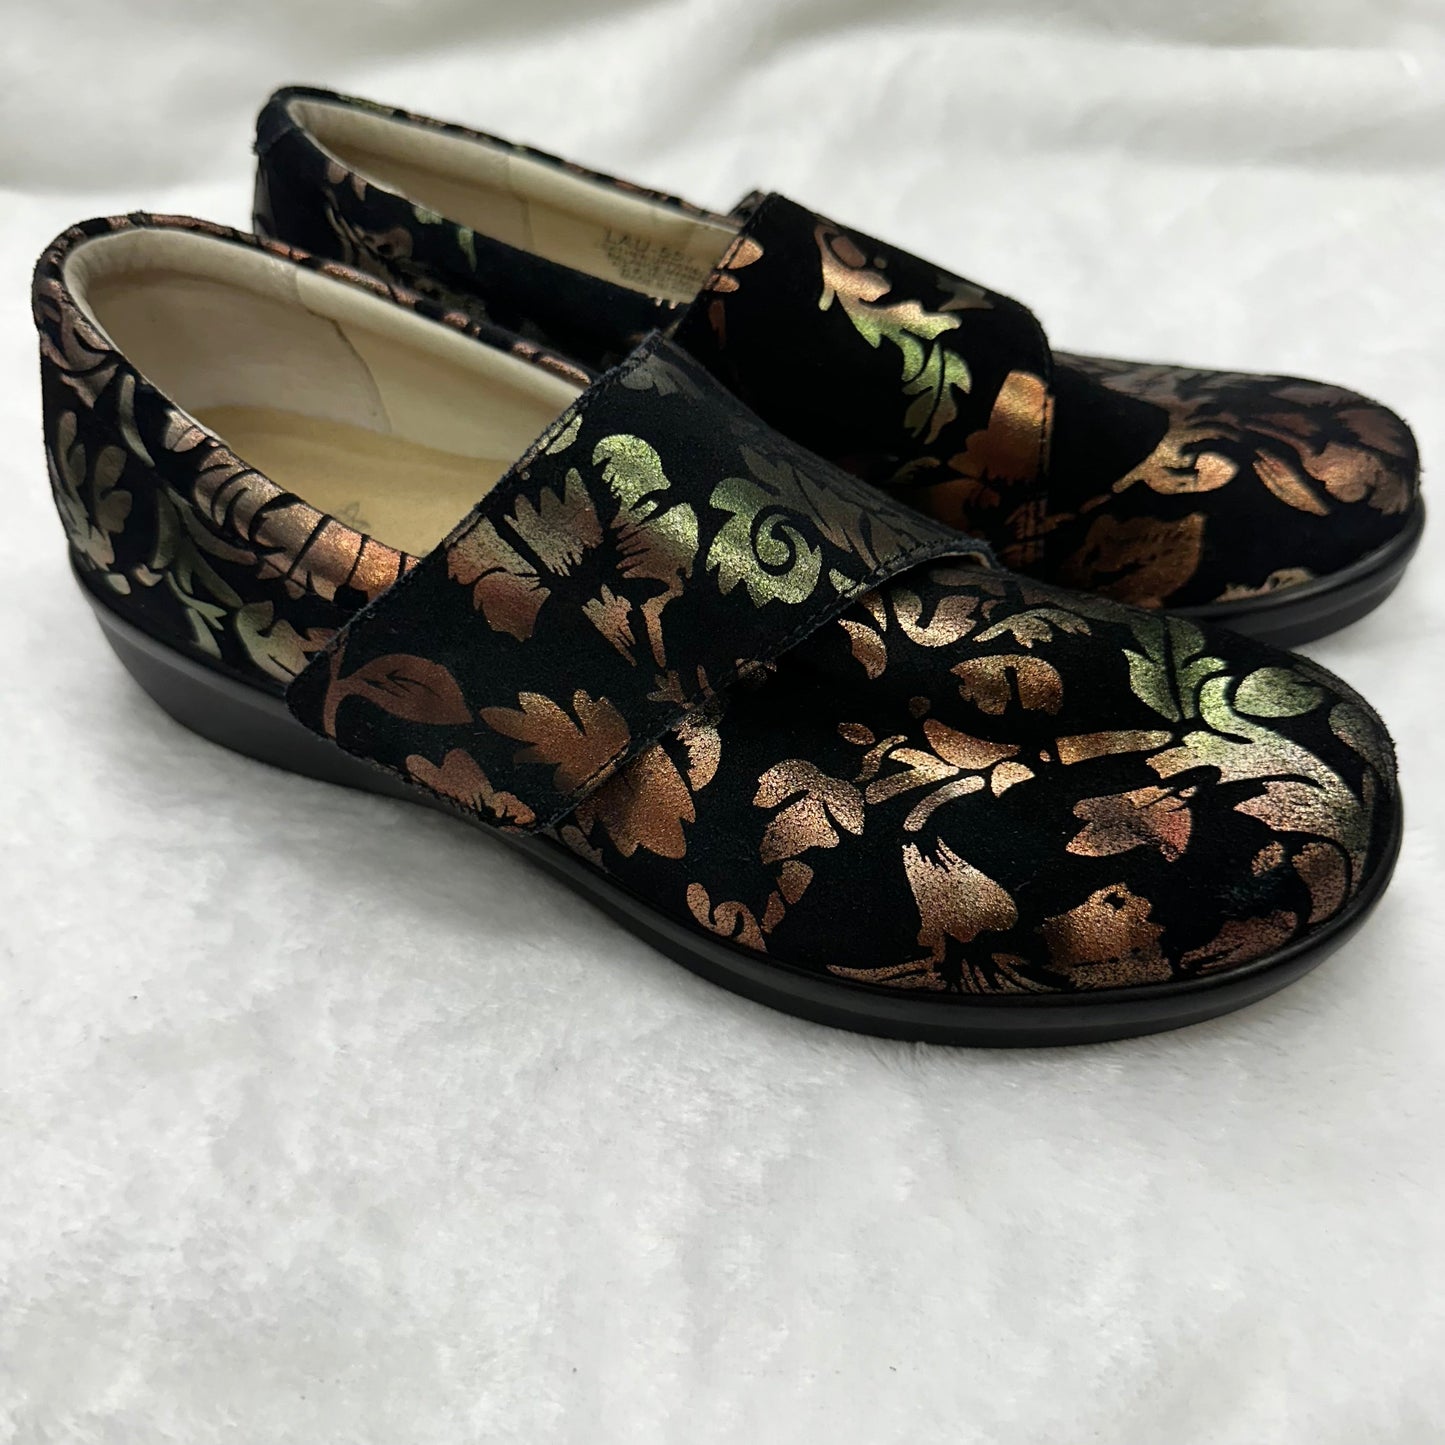 Print Shoes Flats Loafer Oxford Alegria